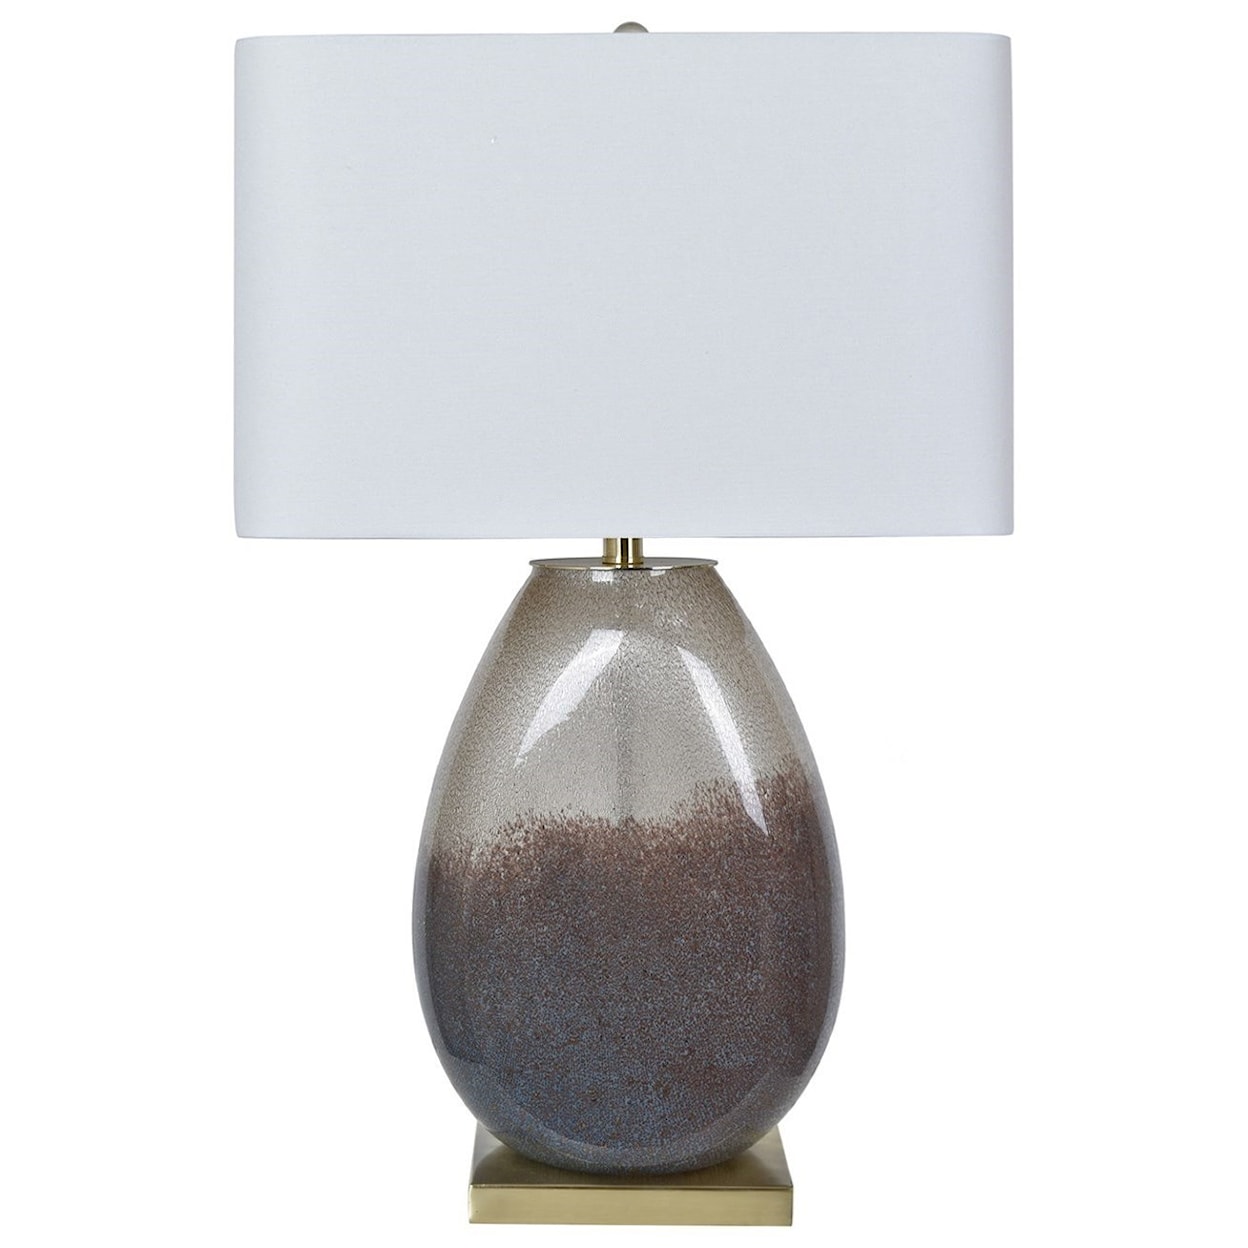 Crestview Collection Lighting Noah Table Lamp